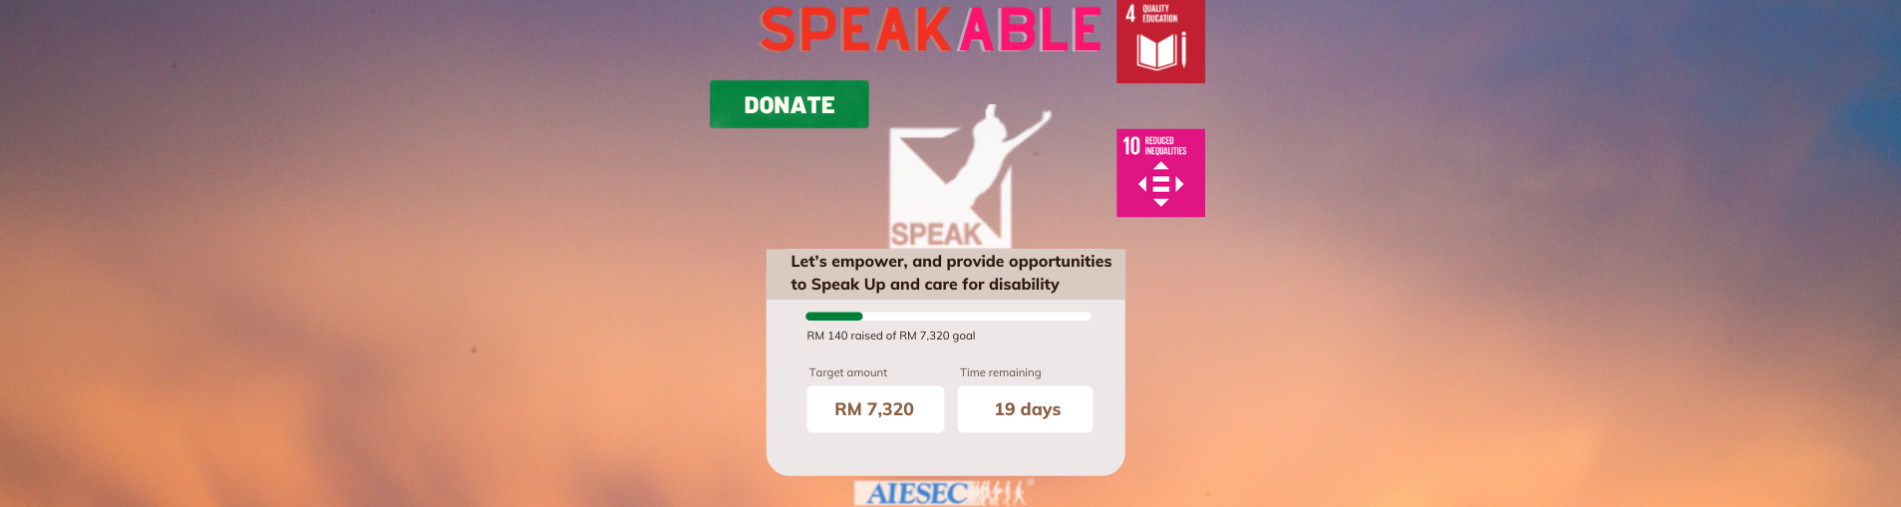 SpeakAble Campaign 